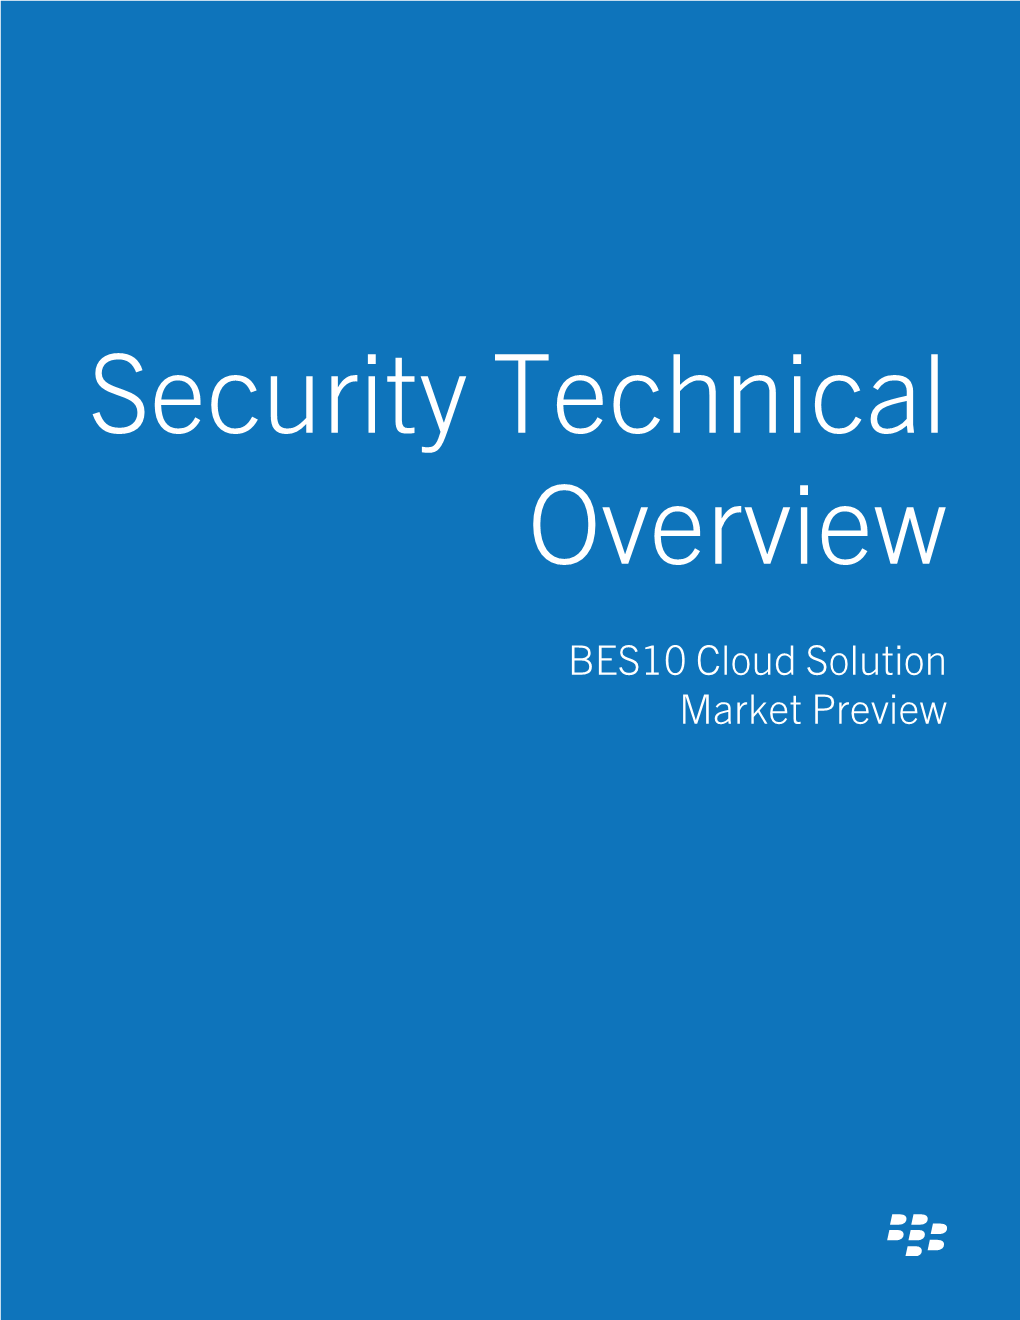 BES10 Cloud Solution-Security Technical Overview